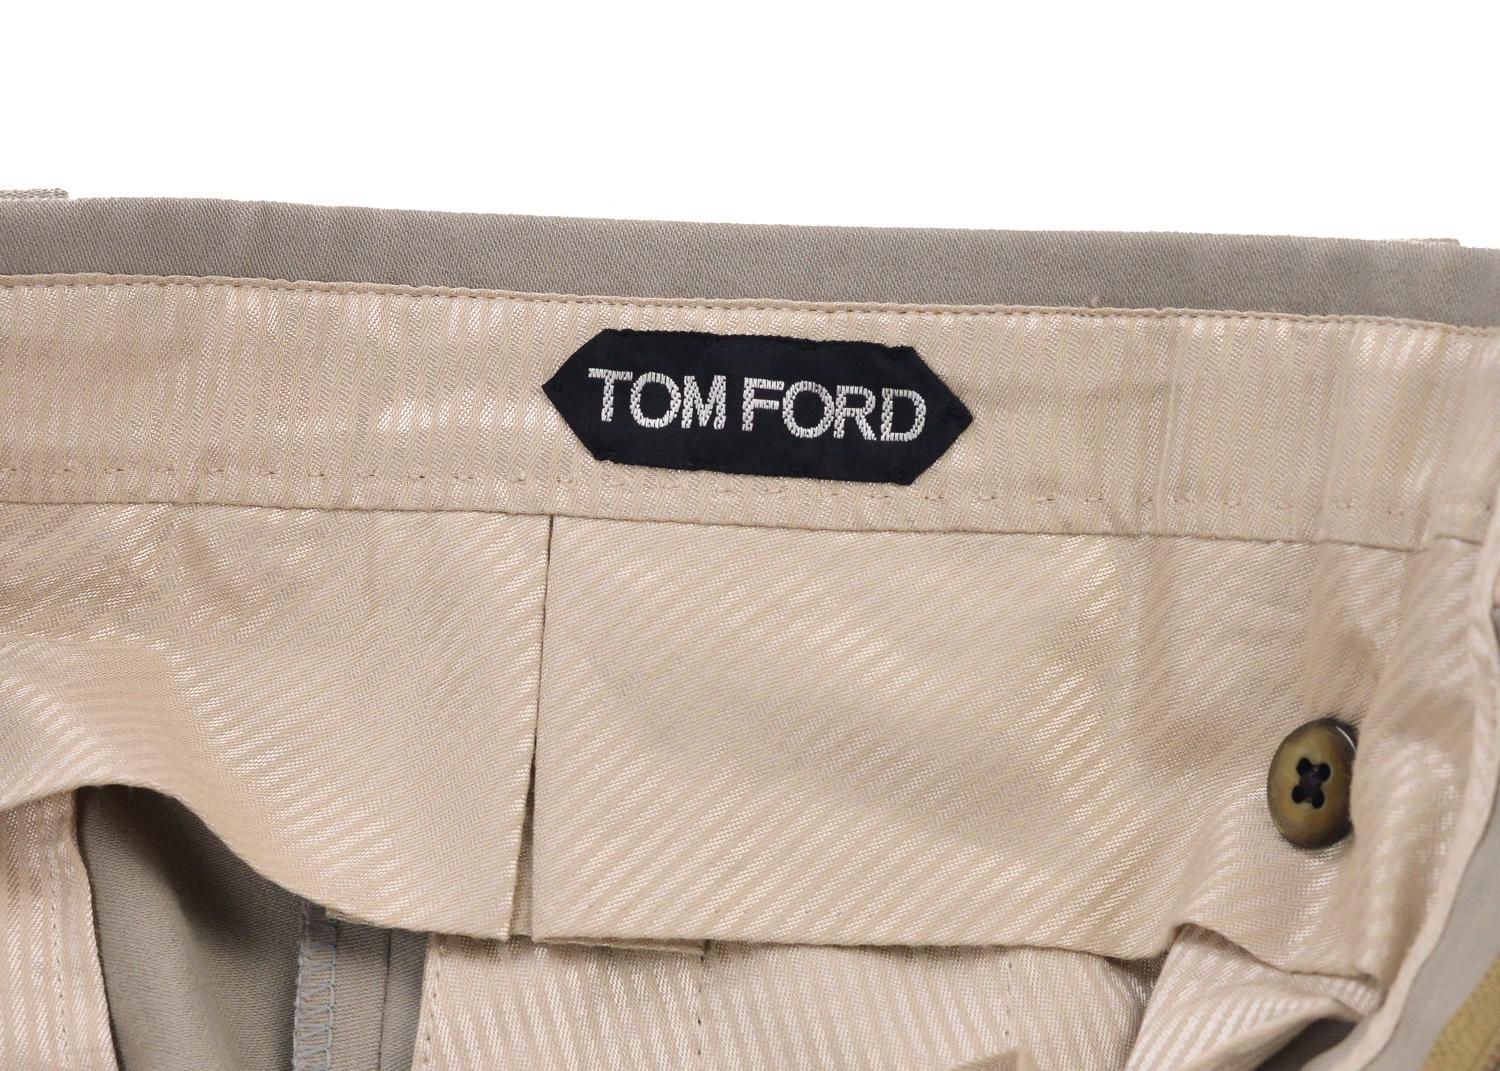 Tom Ford's pleated front trousers will provide subtle sophistication to your ensemble. These pants feature crisp pleated front lines, sheen striped lining, and concealed hem cuffs. You can pair these pants with a crisp white top for the ultimate